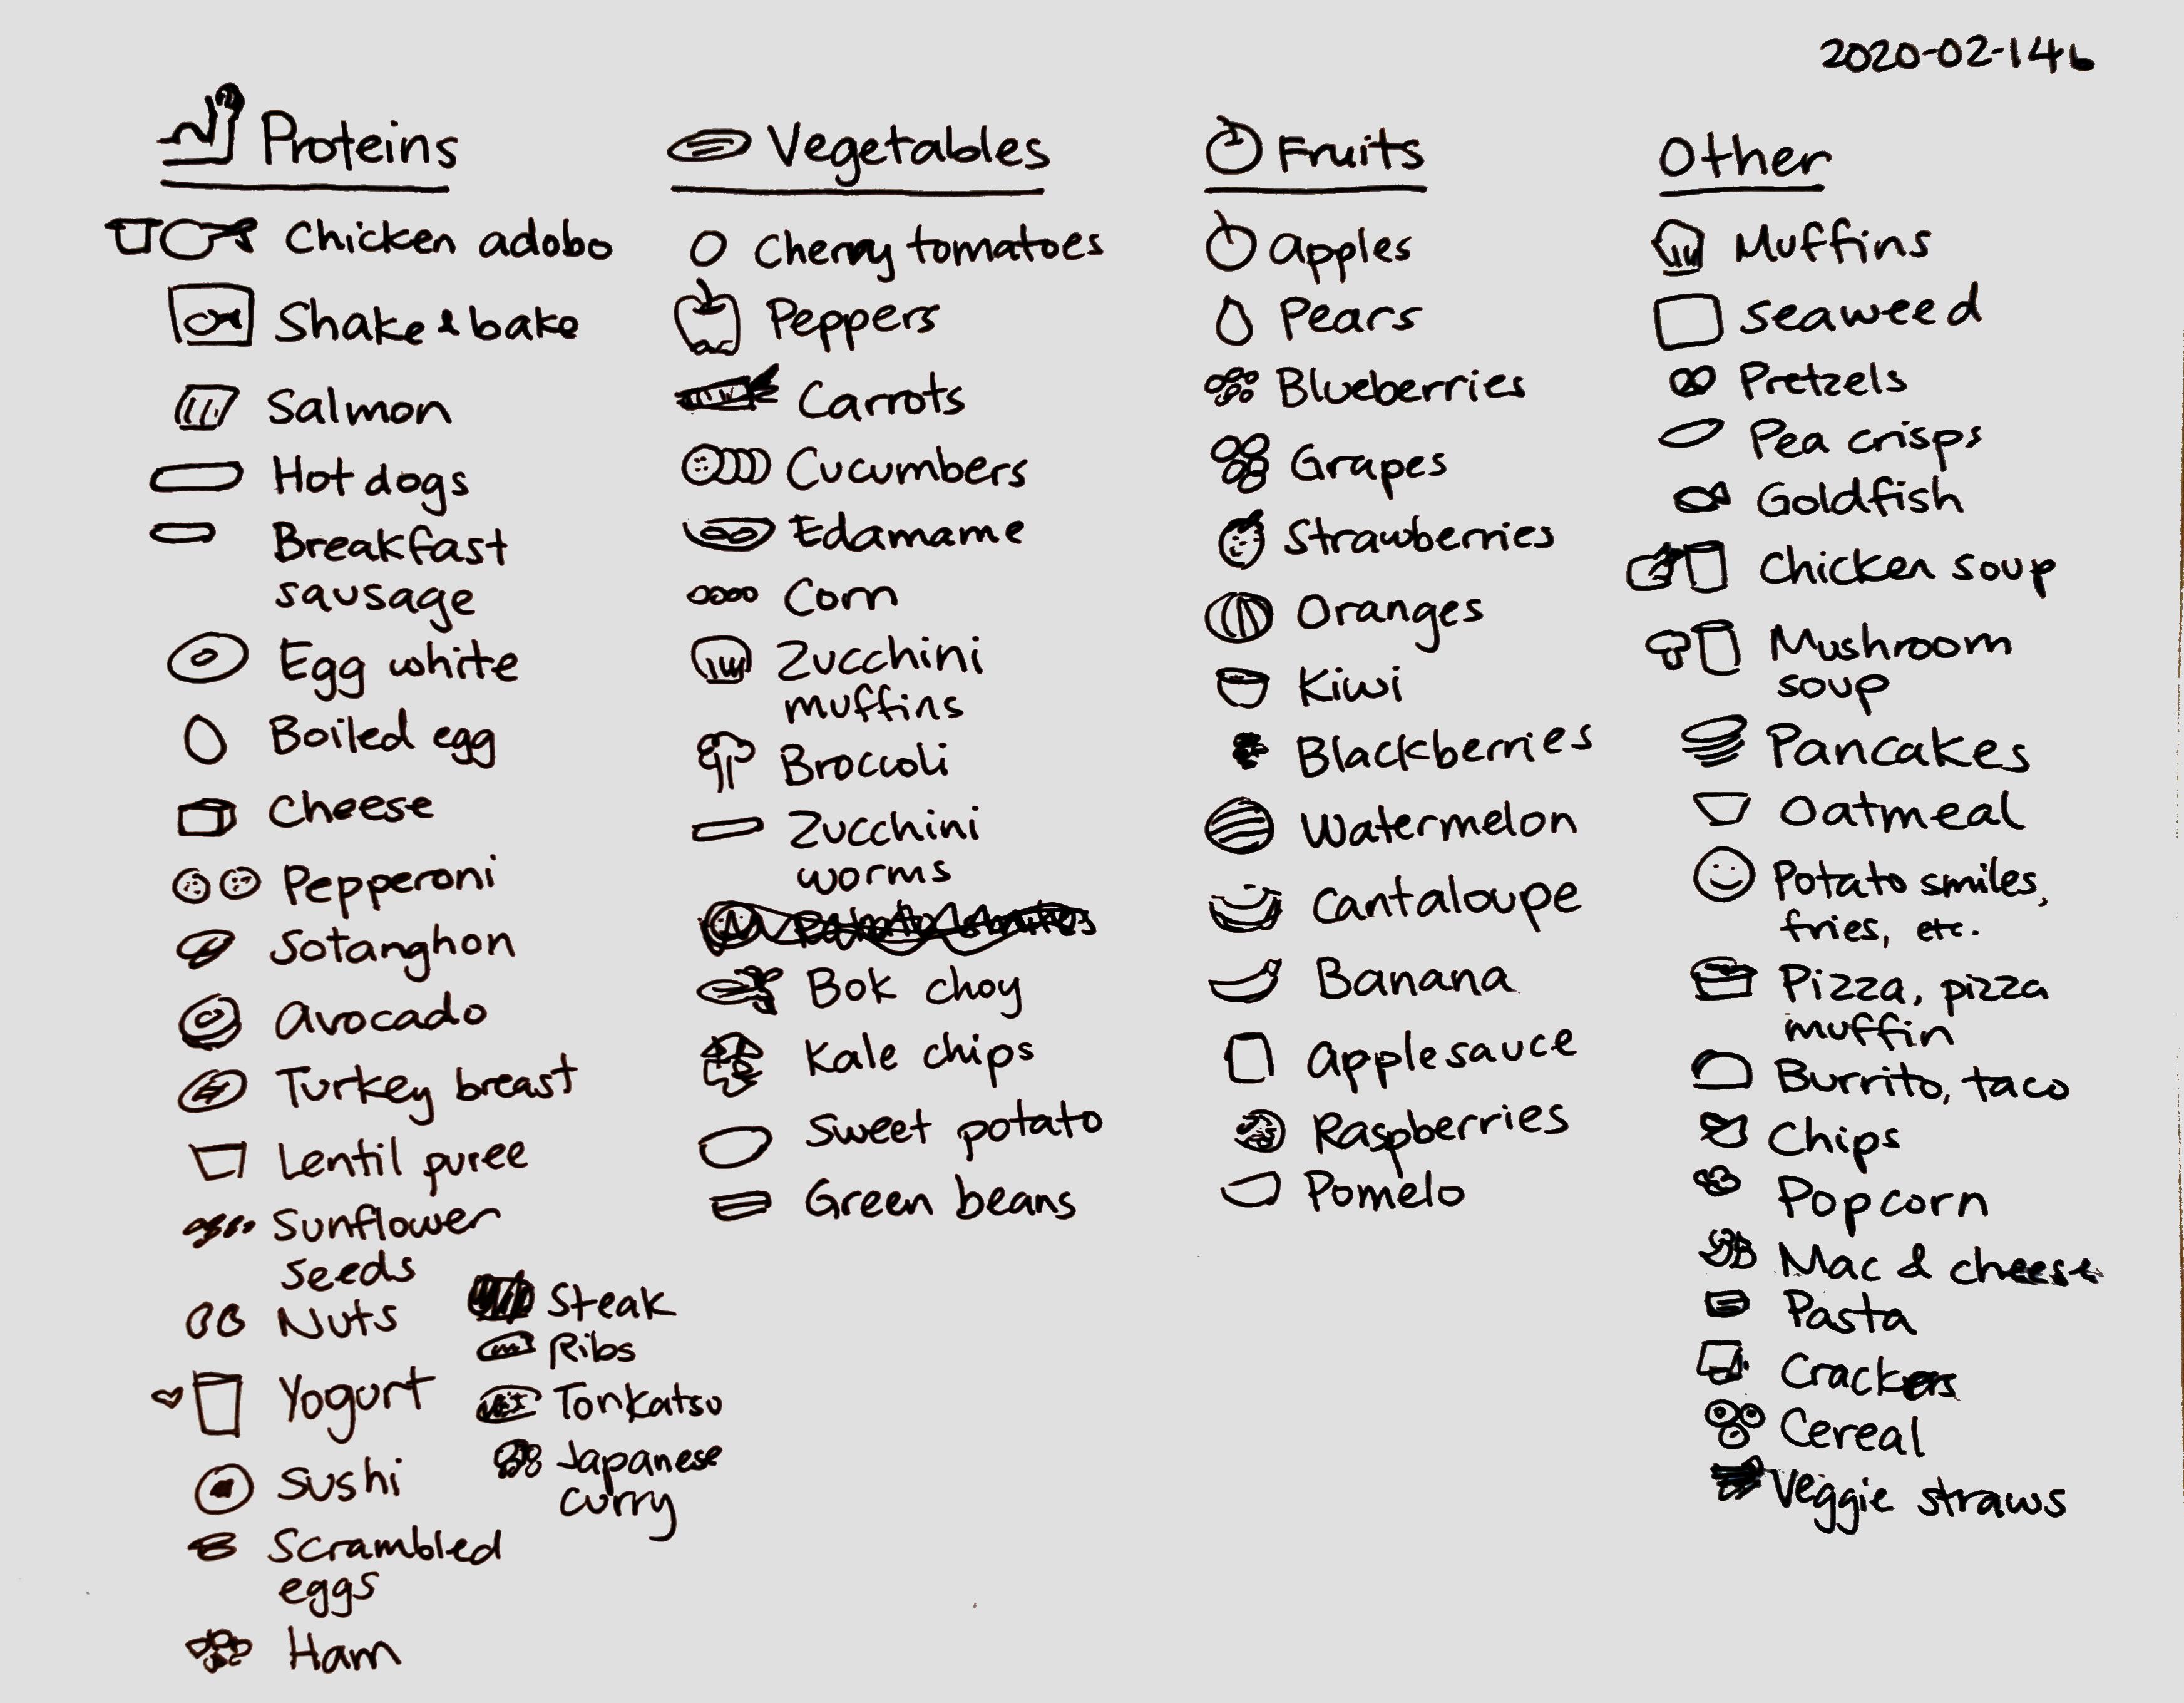 2020-02-14 Meal planning ideas for A- #food.png